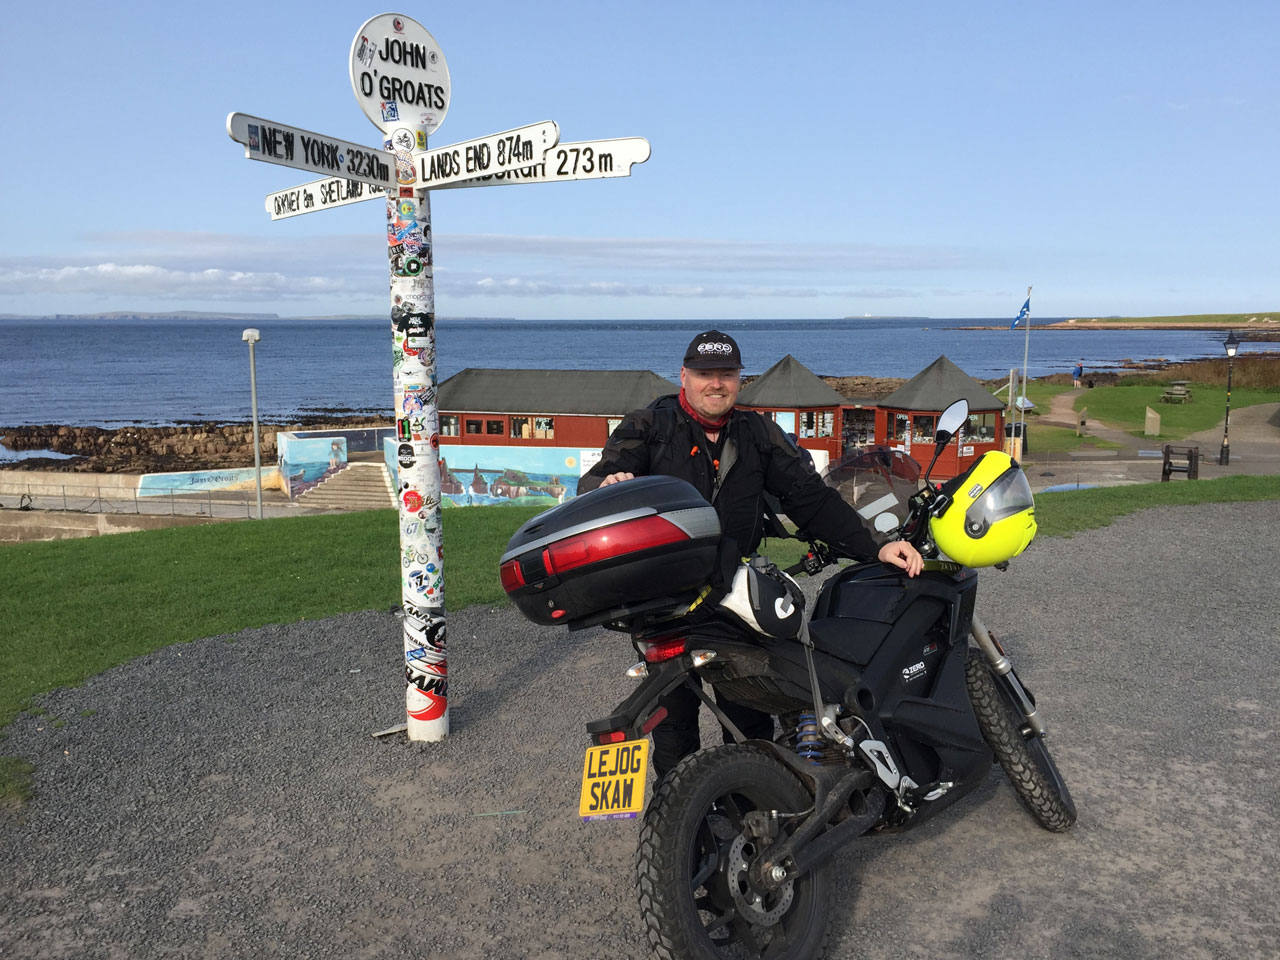 John Chivers and his Zero DSR electric motorcycle at John O'Groats.